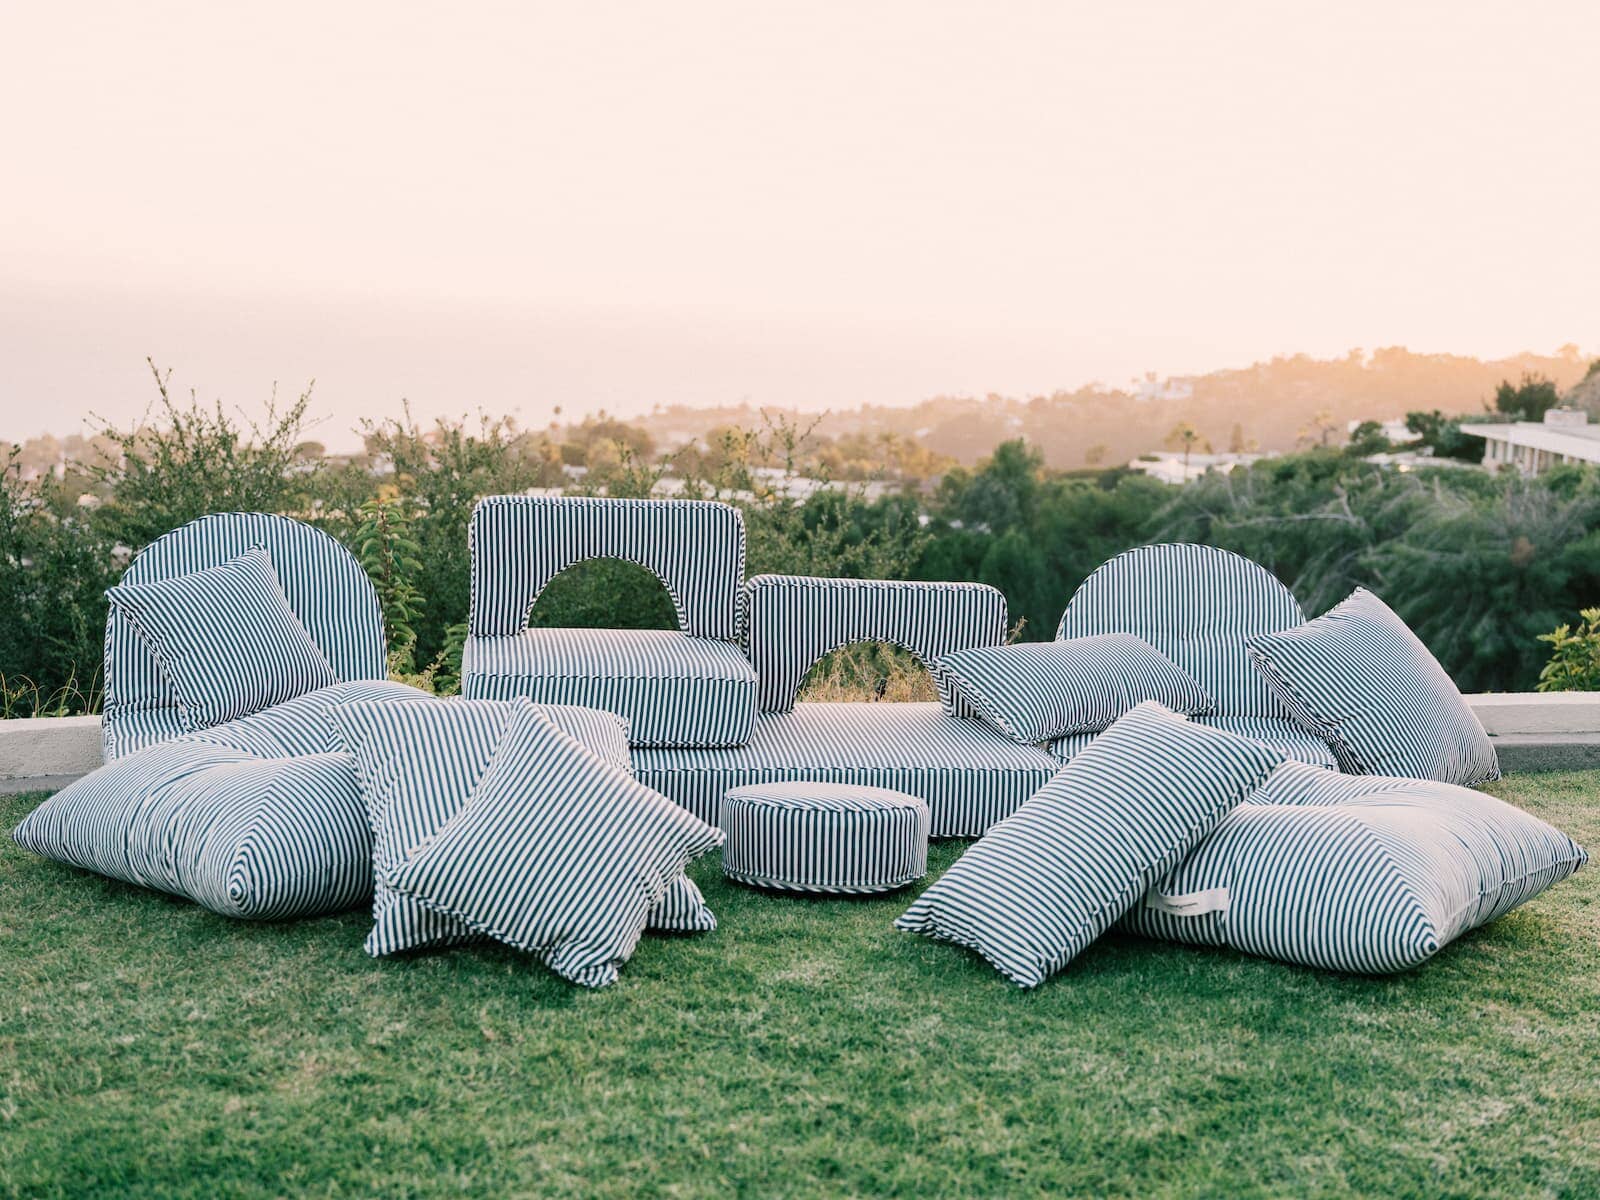 complete outdoor cushion collection outdoors on the grass